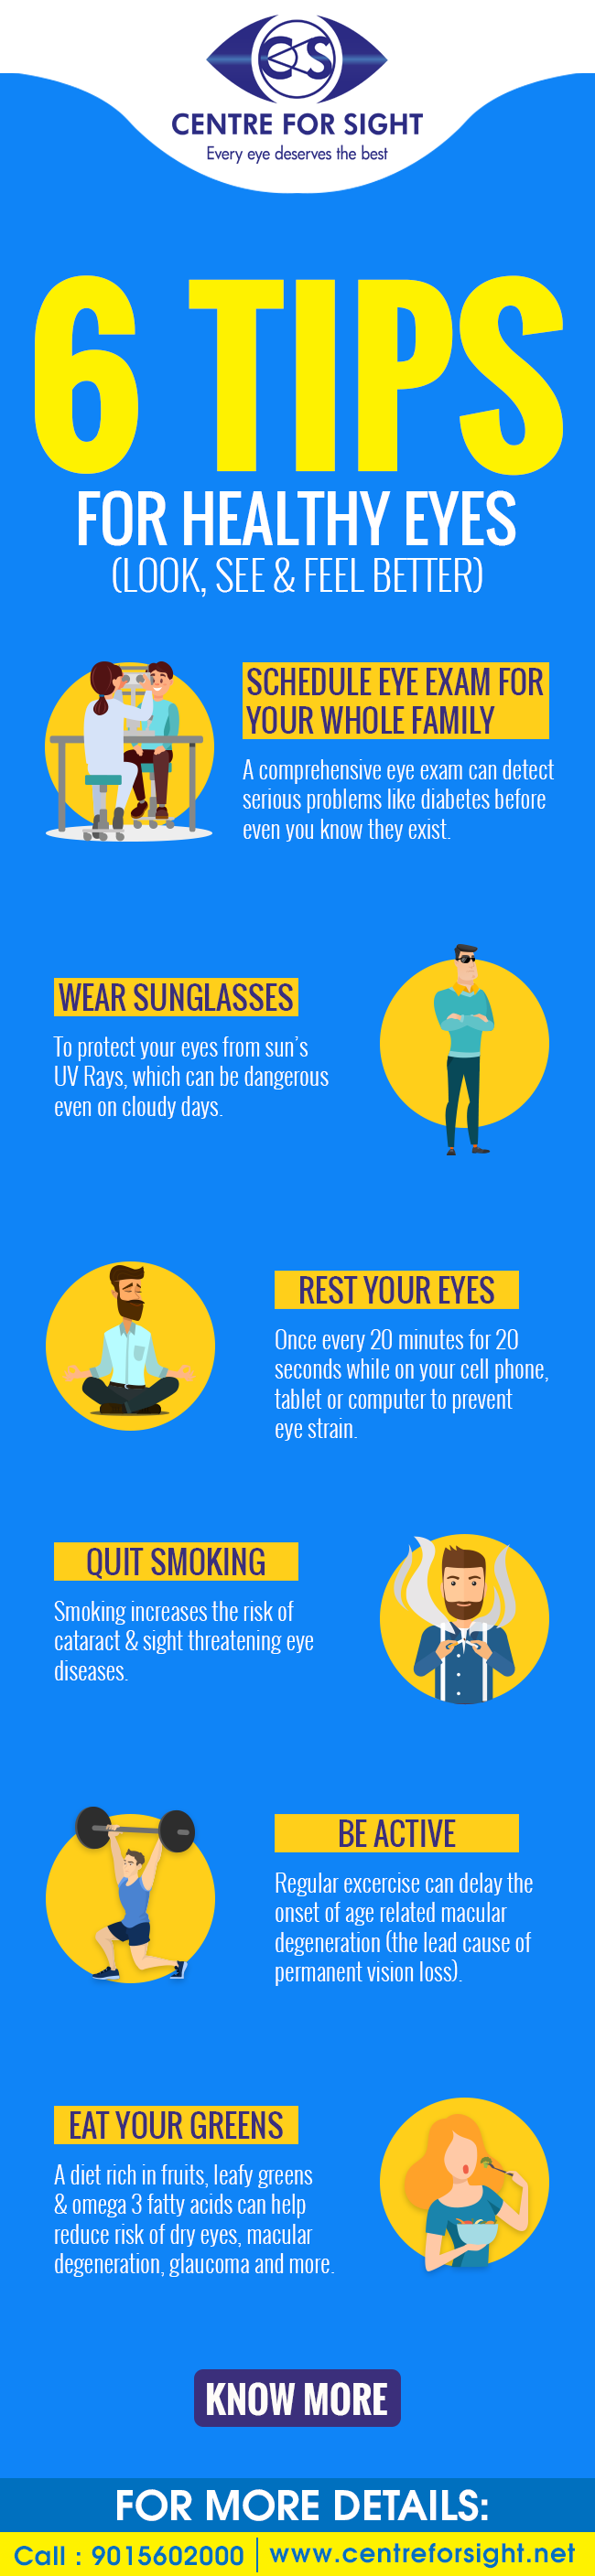 6 Tips For healthy eyes.png  by centreforsight